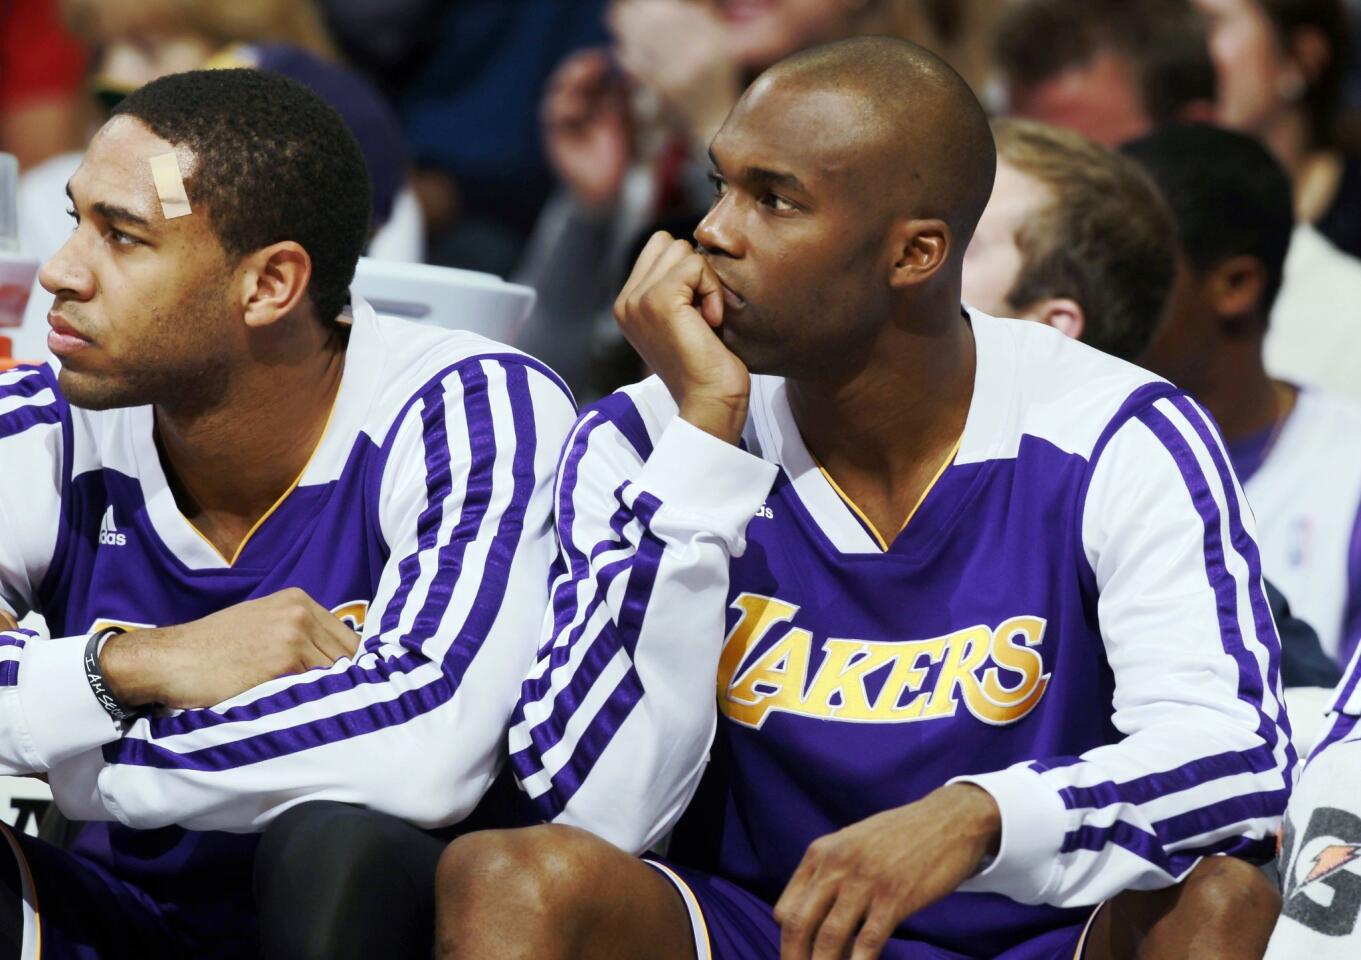 Lakers forward Xavier Henry, left, and guard Jodie Meeks watch the final seconds elapse in a 111-99 loss to the Nuggets on Wednesday night in Denver.